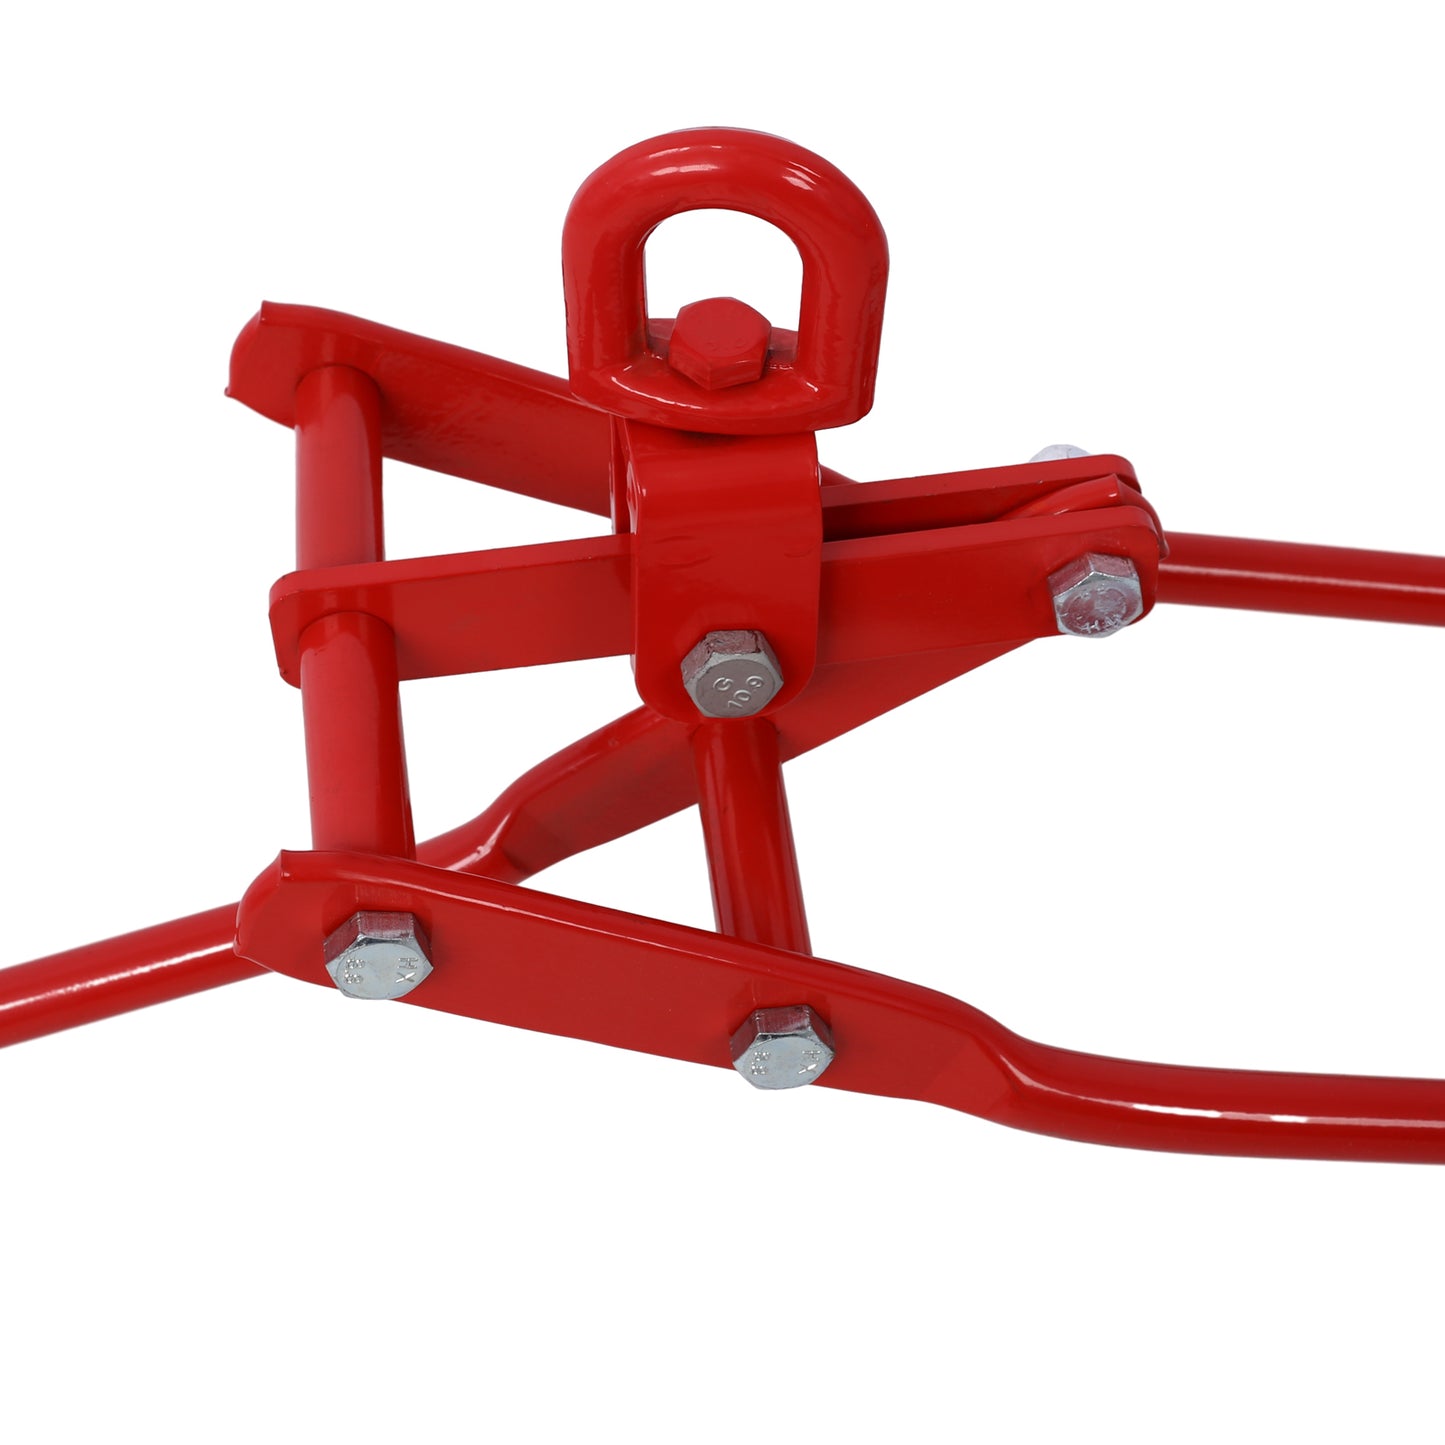 36in 3 Claw Log Grapple for Logging Tongs, Eagle Claws Design Log Lifting Tongs Log Grabs, Timber Lifting Tongs for Truck, ATV, Tractor and Skidder